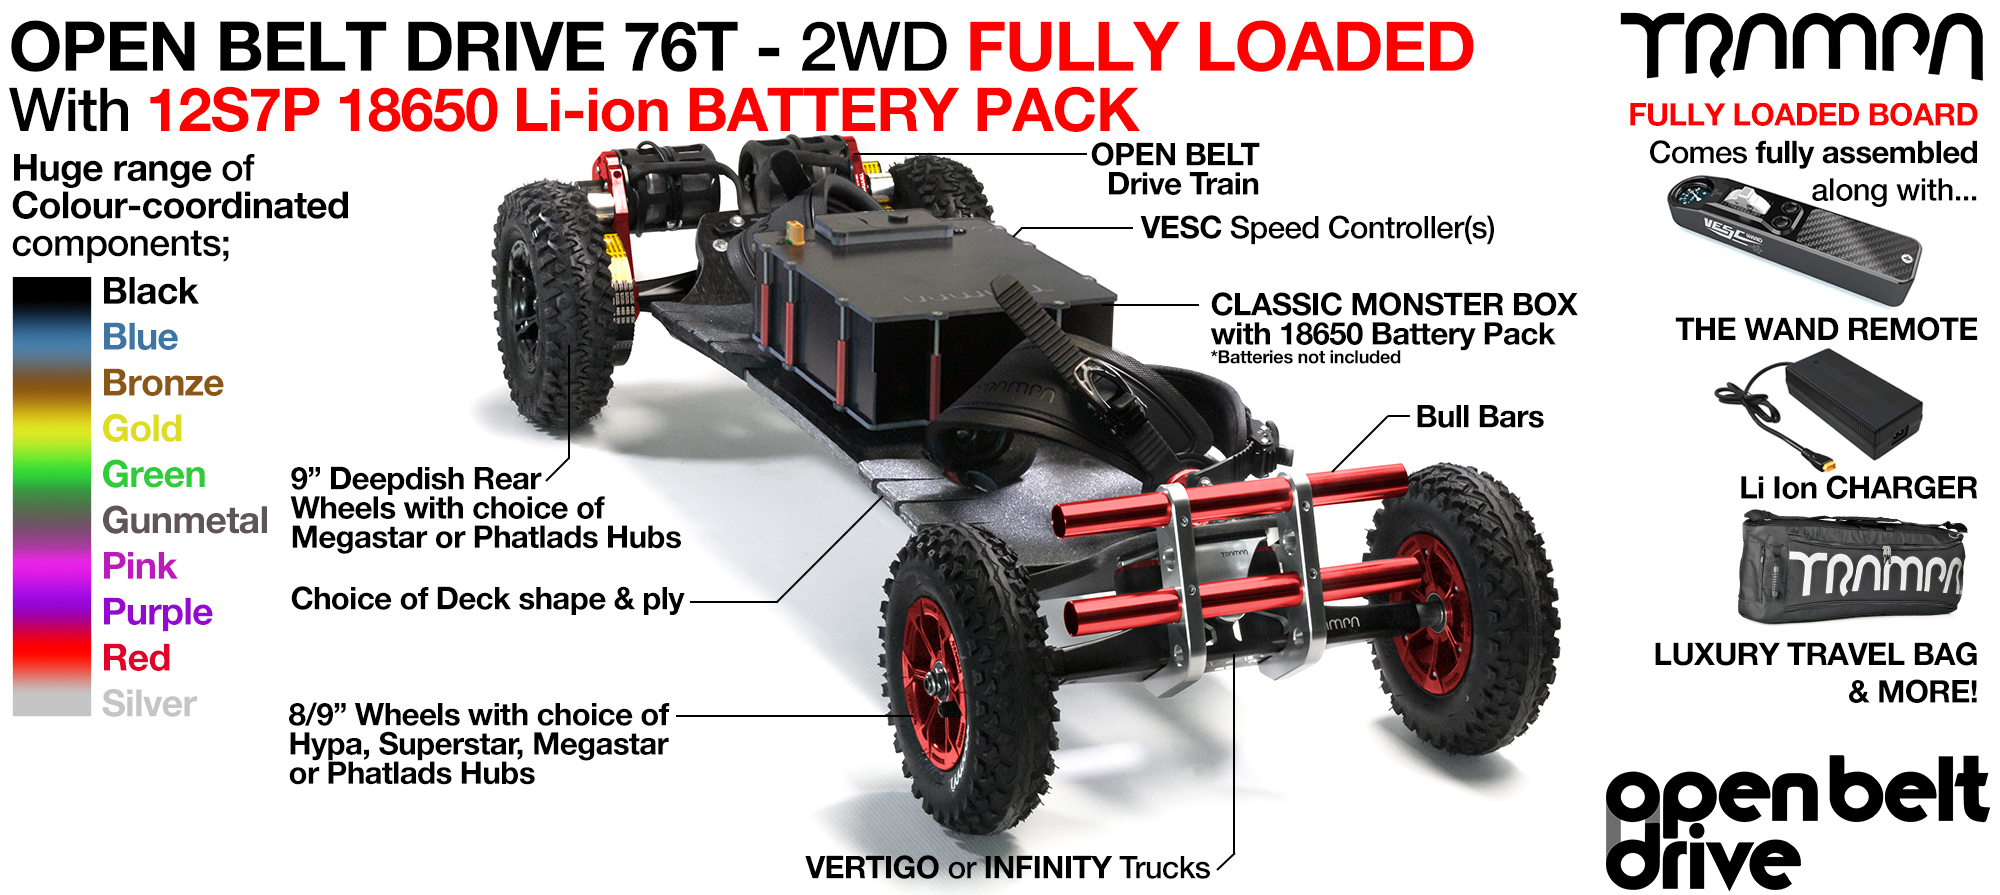 2WD 76T Open Belt Drive TRAMPA Electric Mountainboard with 9Inch Wheels & 76 Tooth Pulleys - FULLY LOADED 18650 Cell Pack